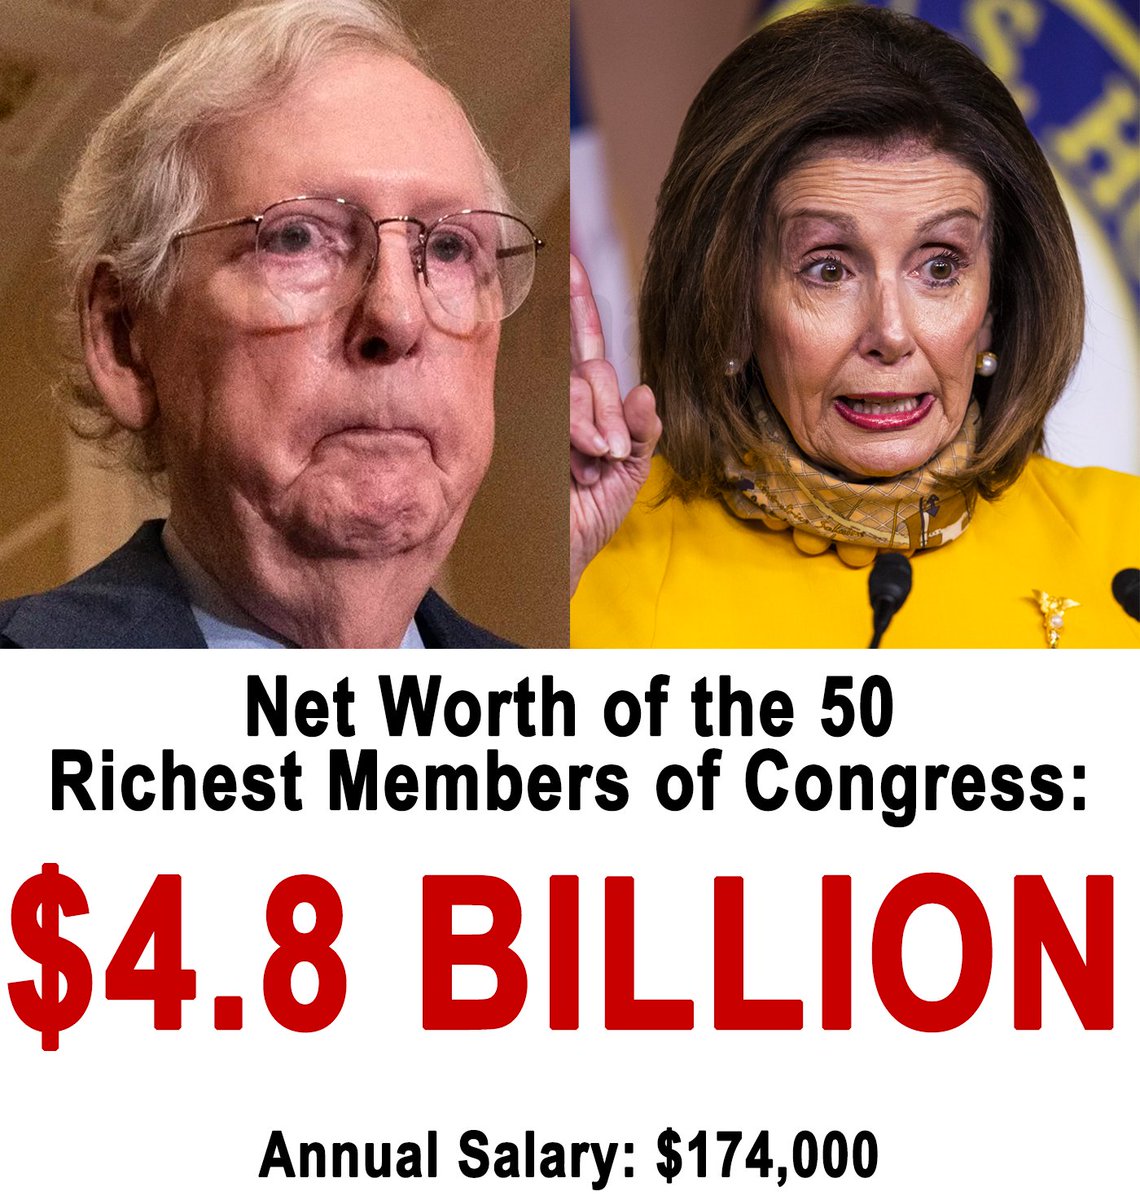 The combined net worth of the 50 richest members of Congress is $4.8 Billion. With an annual salary of $174k, they would have to work 27,500 years to earn that much money. The highest positions of our government, on both sides of the aisle, are abusing their power for personal